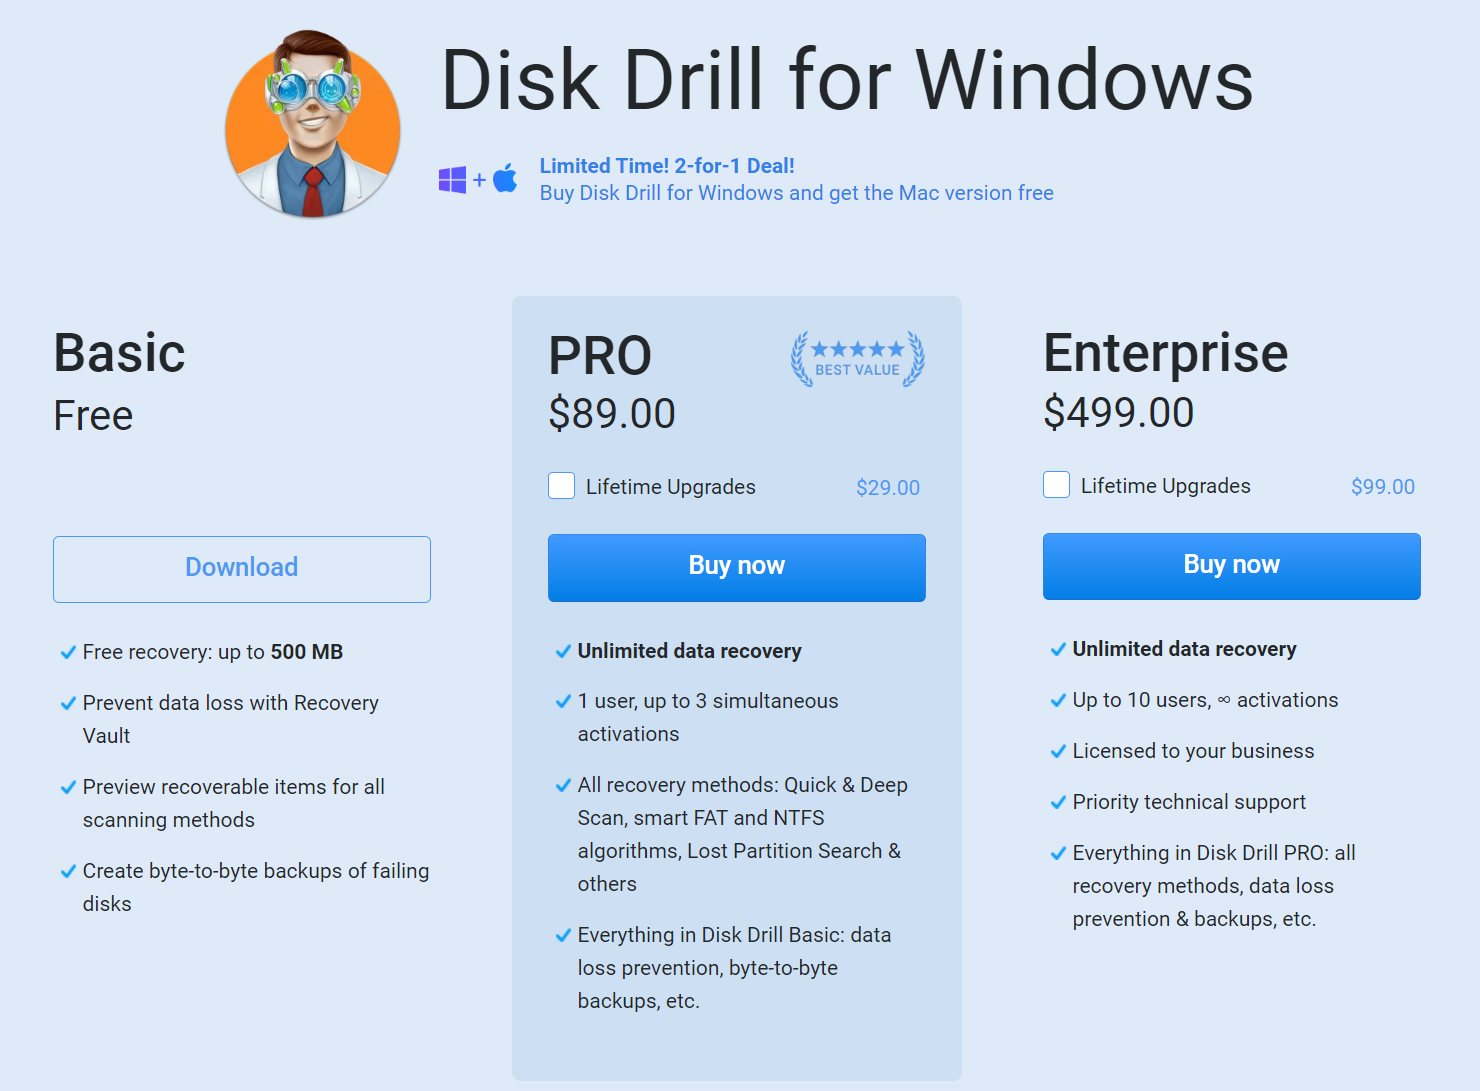 Disk Drill's price for Windows